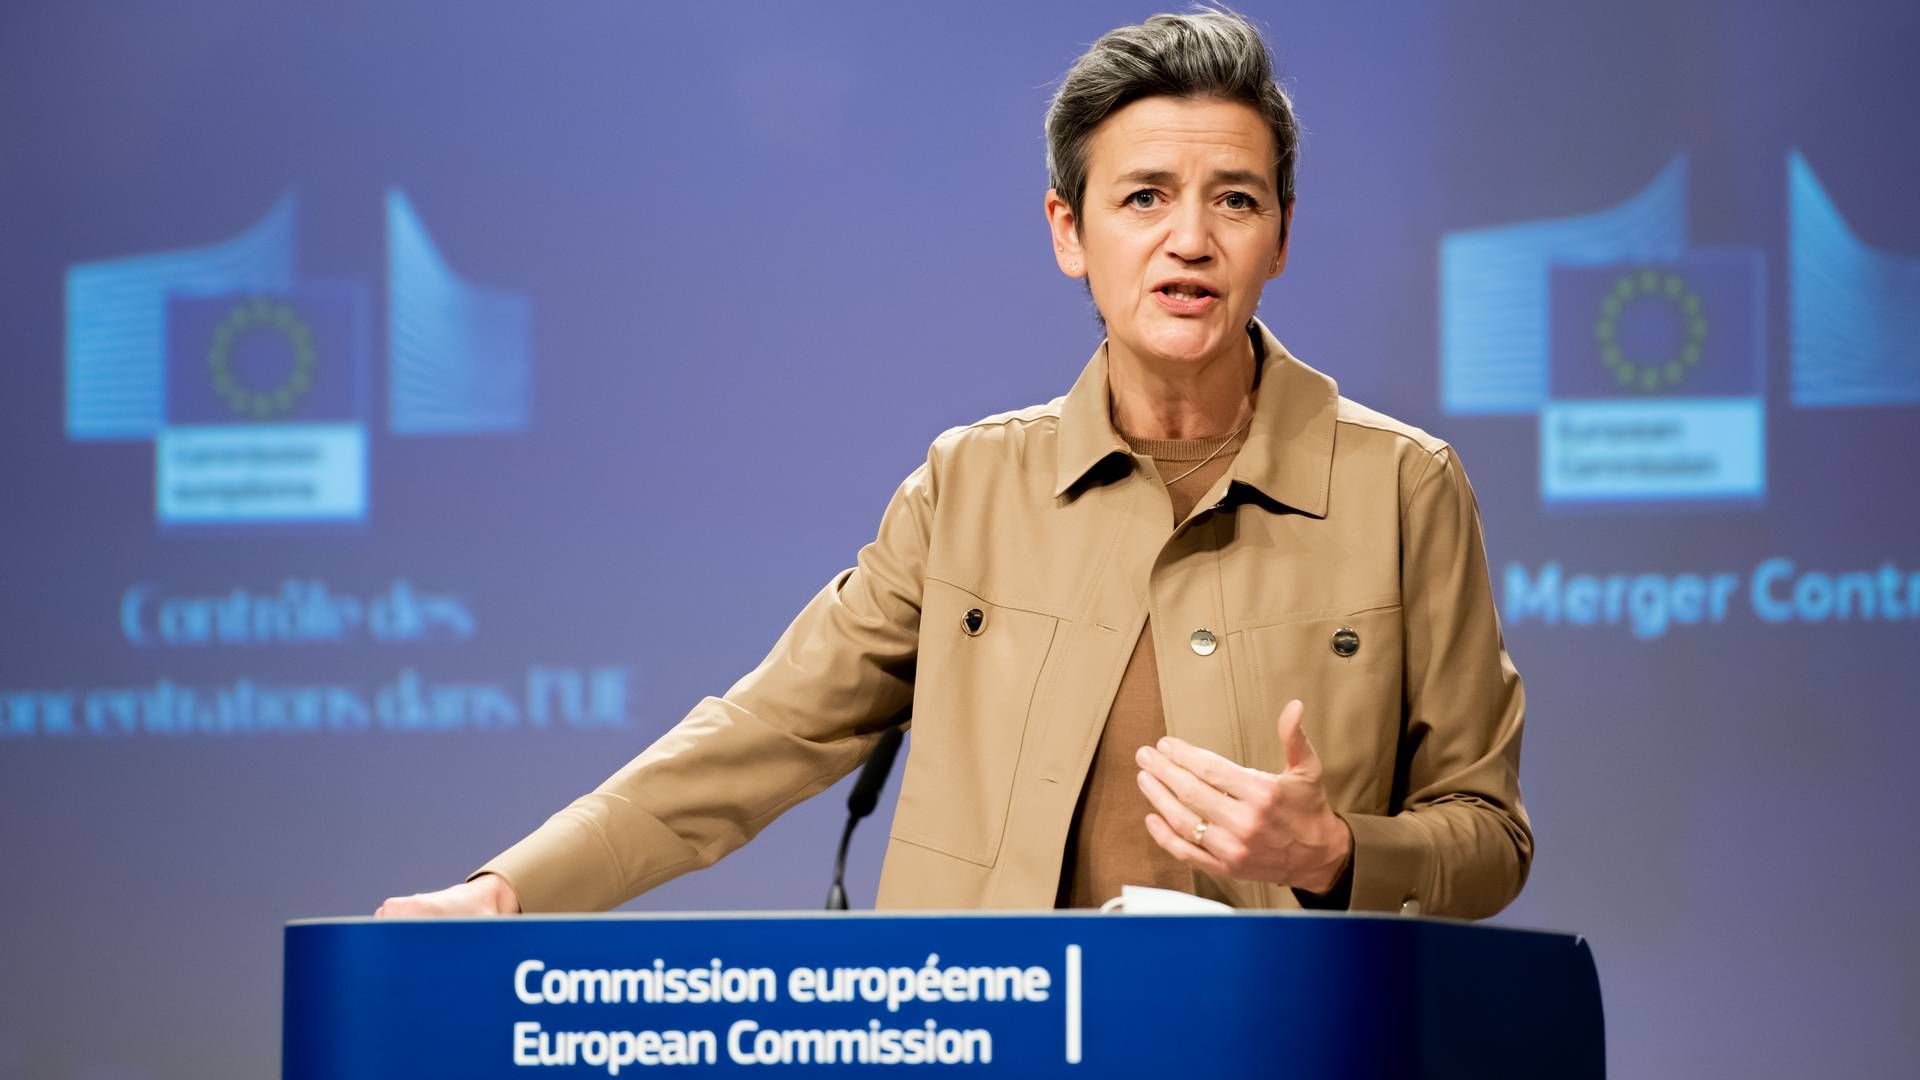 Margrethe Vestager, EU Commission's executive vice president for ”A Europe Fit for the Digital Age" | Photo: Jennifer Jacquemart / European Unio